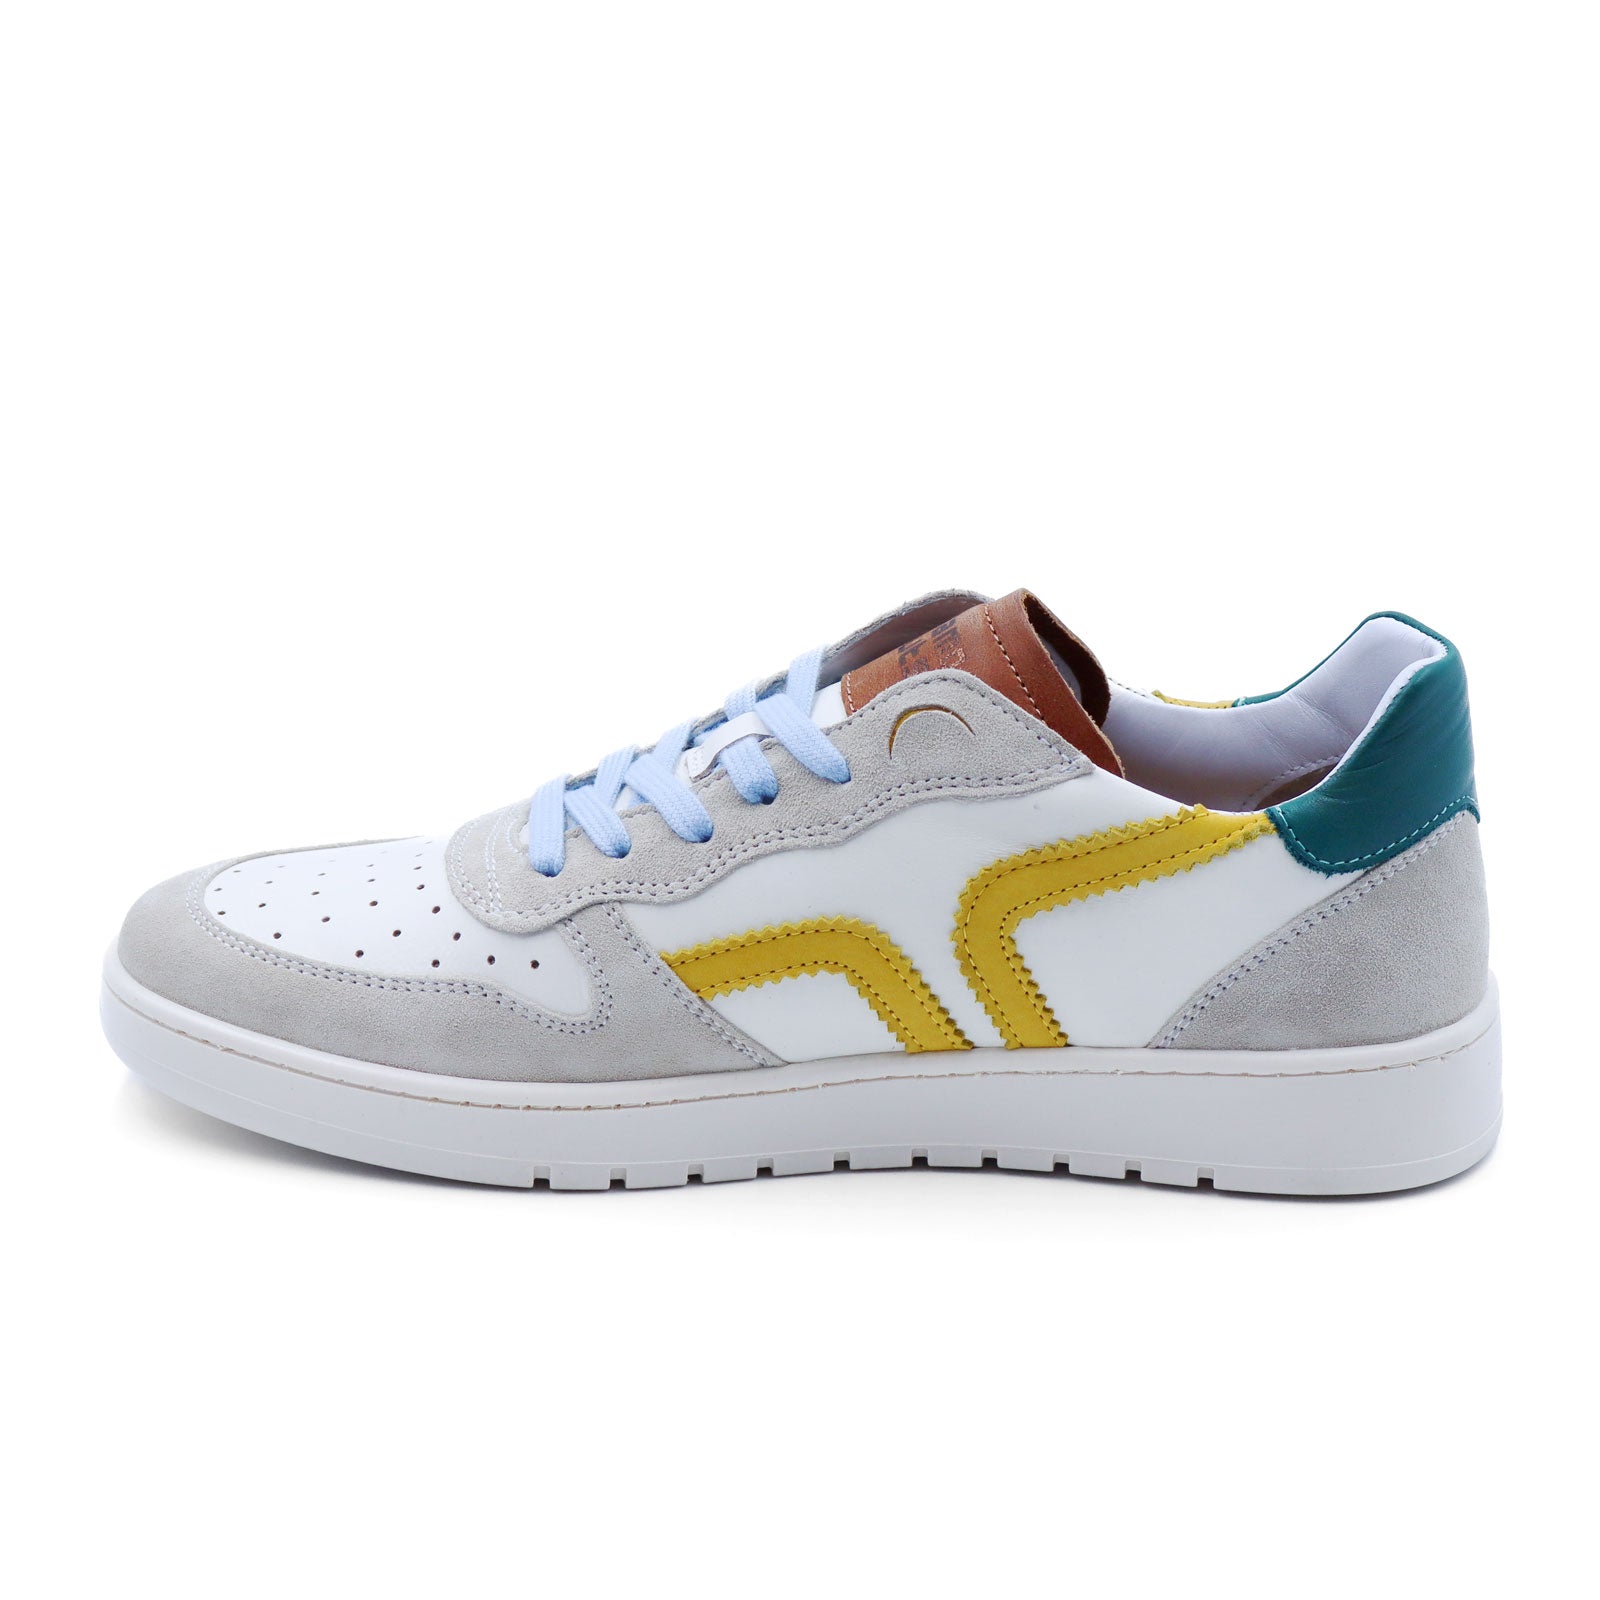 Buy Running Shoes For Men: Space-Rider-Cream-Golden | Campus Shoes